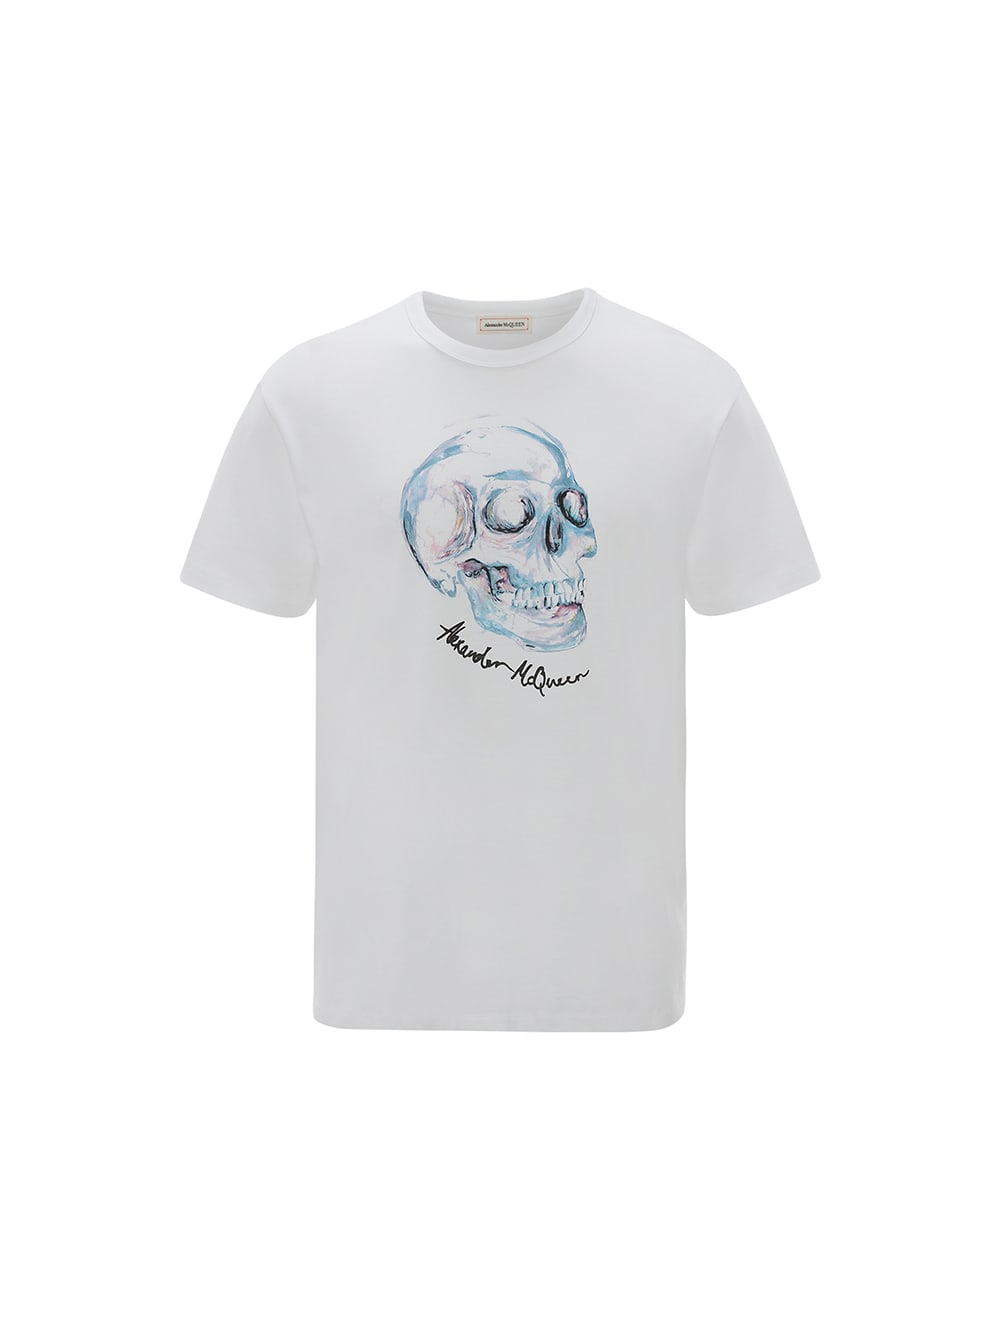 Alexander McQueen Man White T-shirt With Watercolored Skull